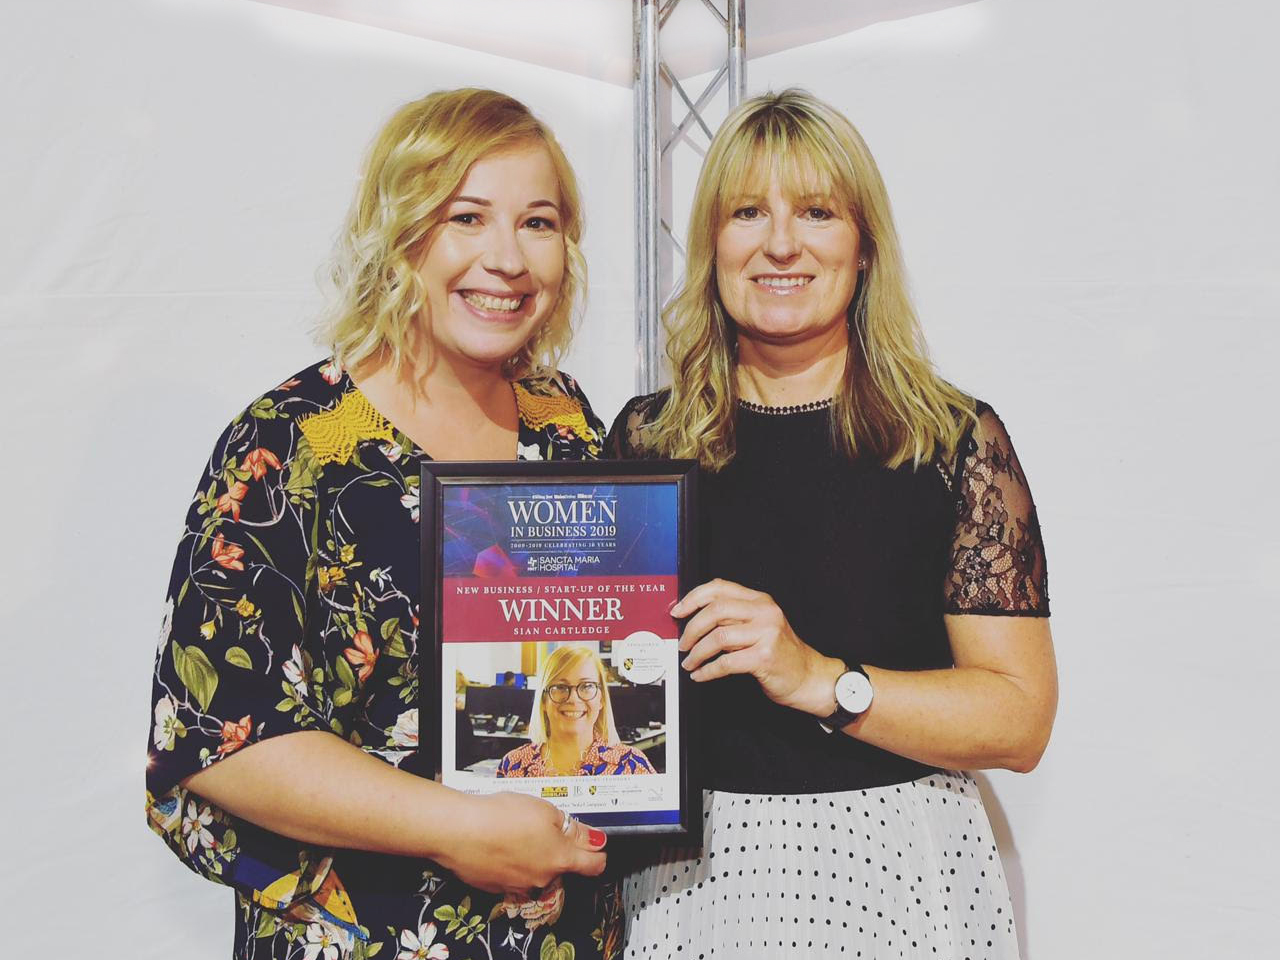 Sian and another woman hold up her Welsh Women in Business award